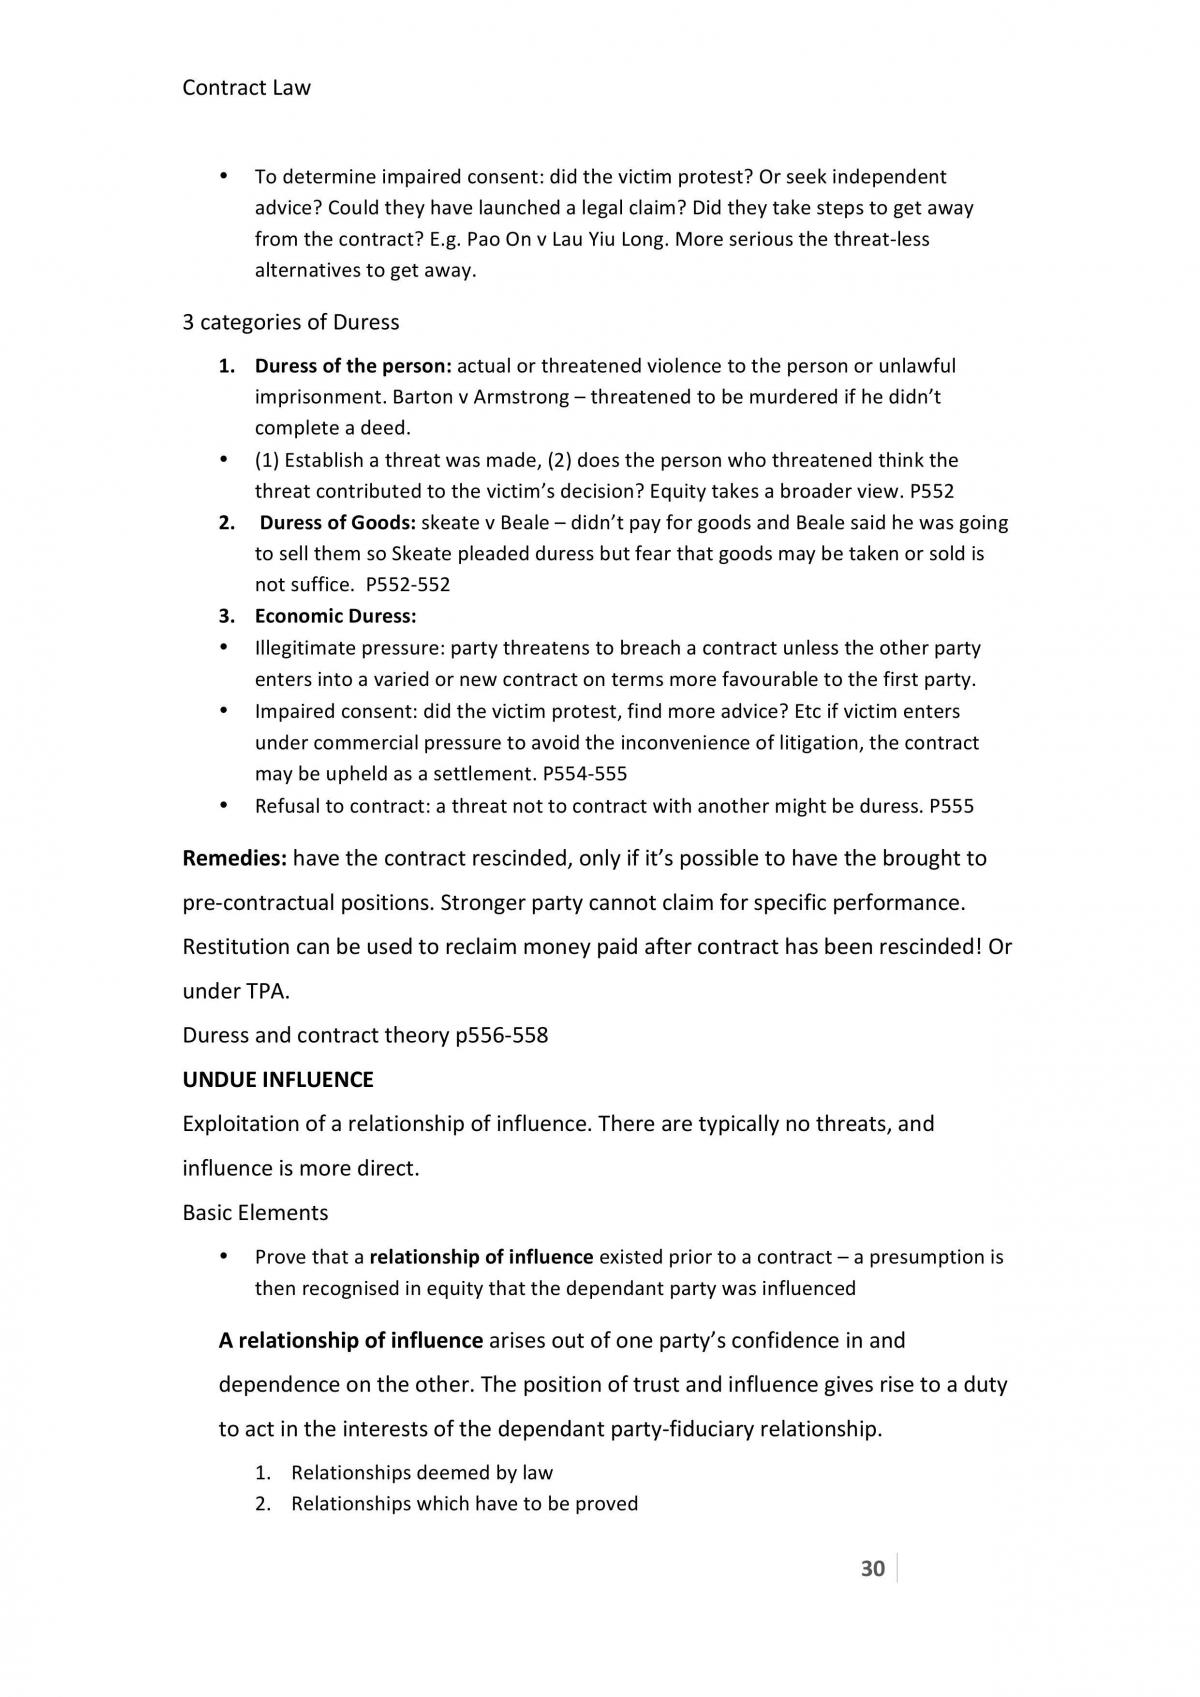 Contract Law full notes | 6594 - Contract Law - Canberra | Thinkswap